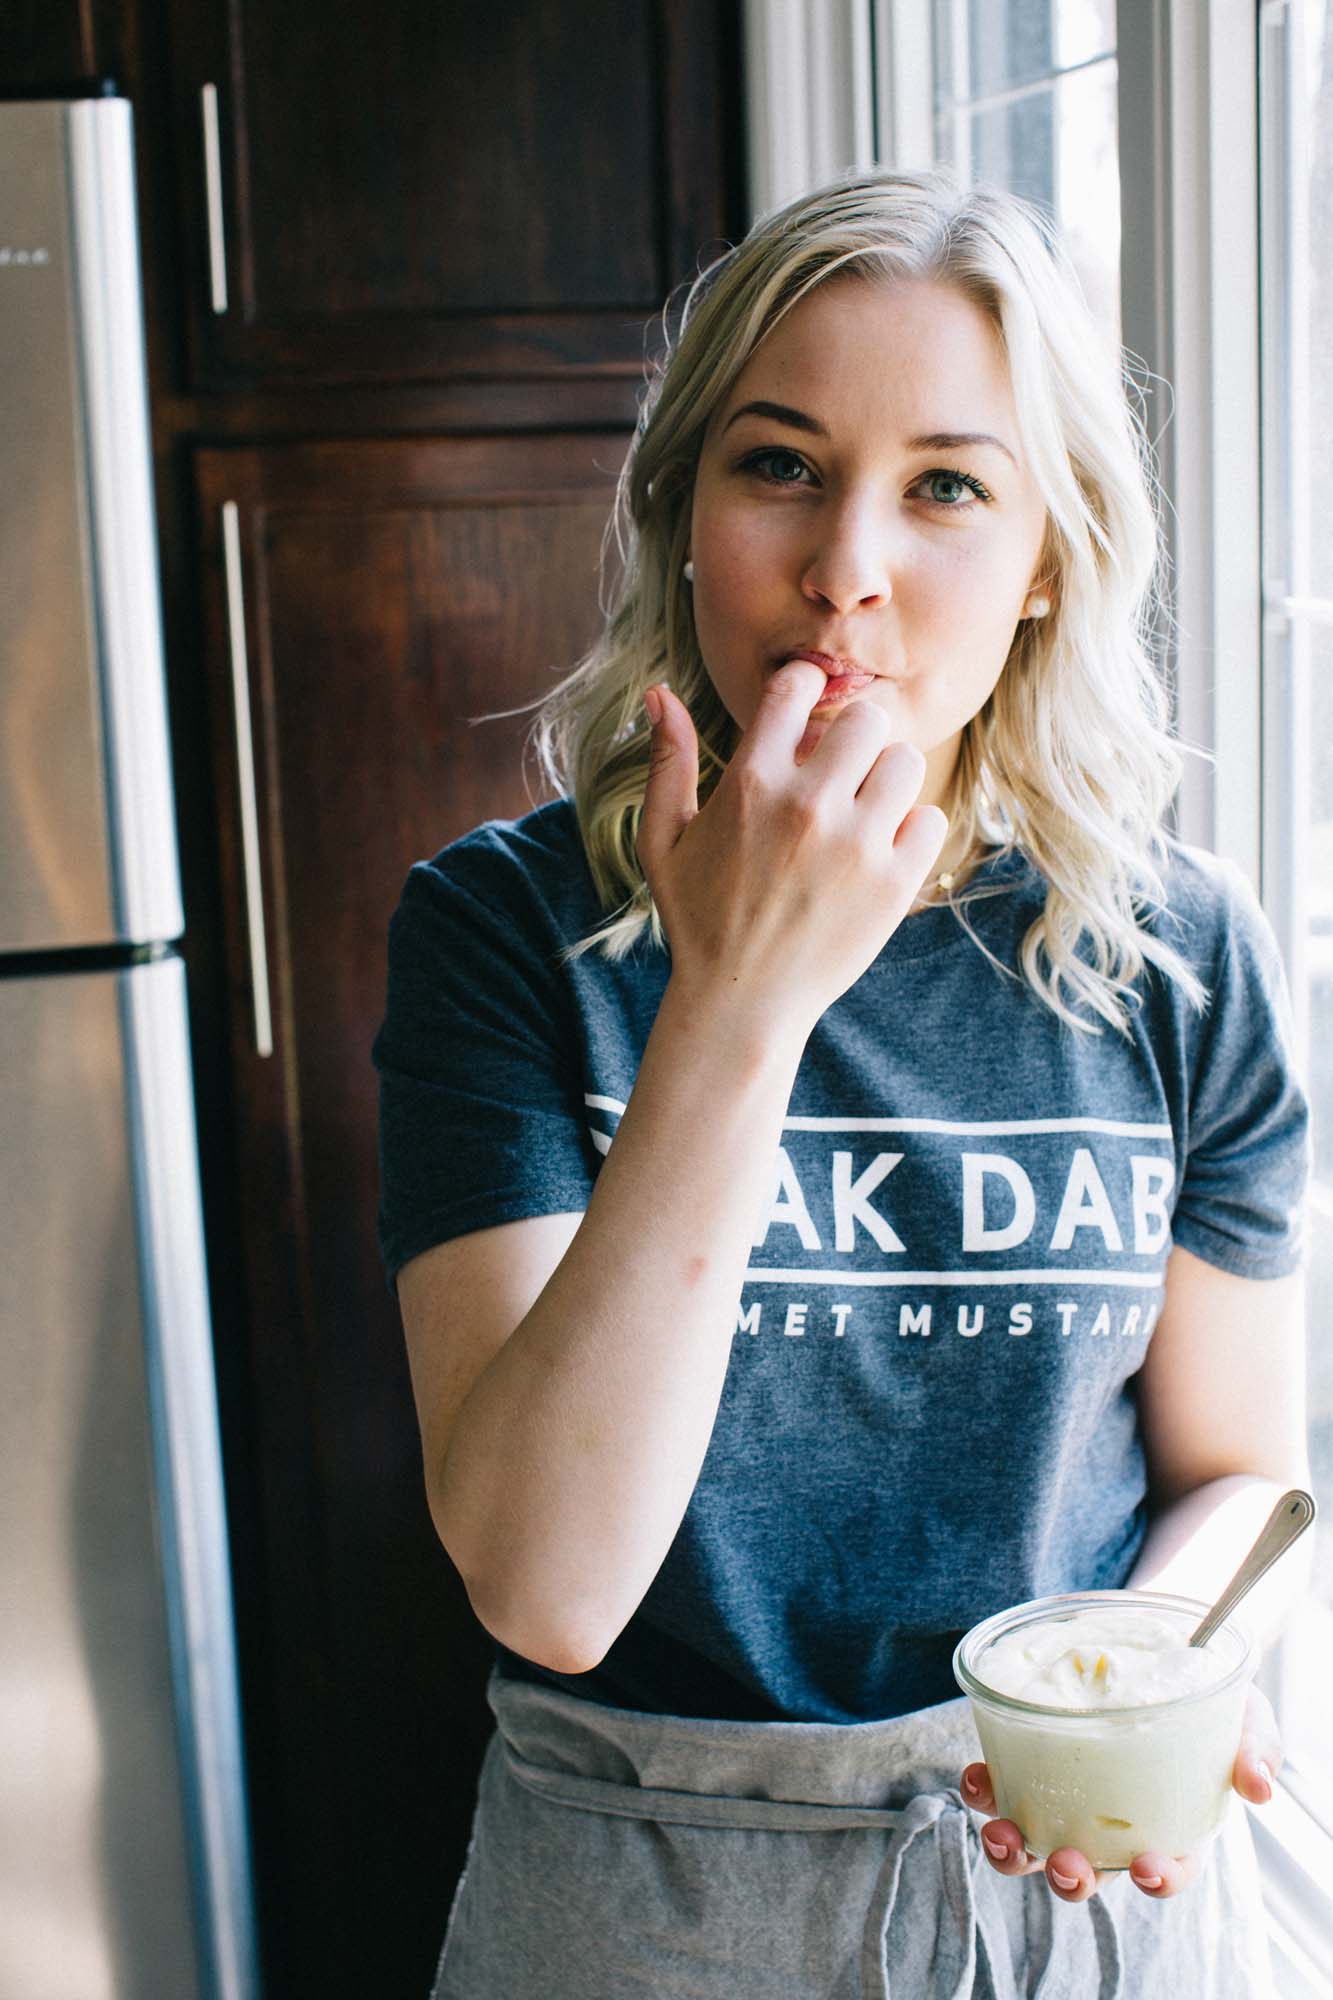 Smak Dab founder Carly tasting homemade mayonnaise on her finger